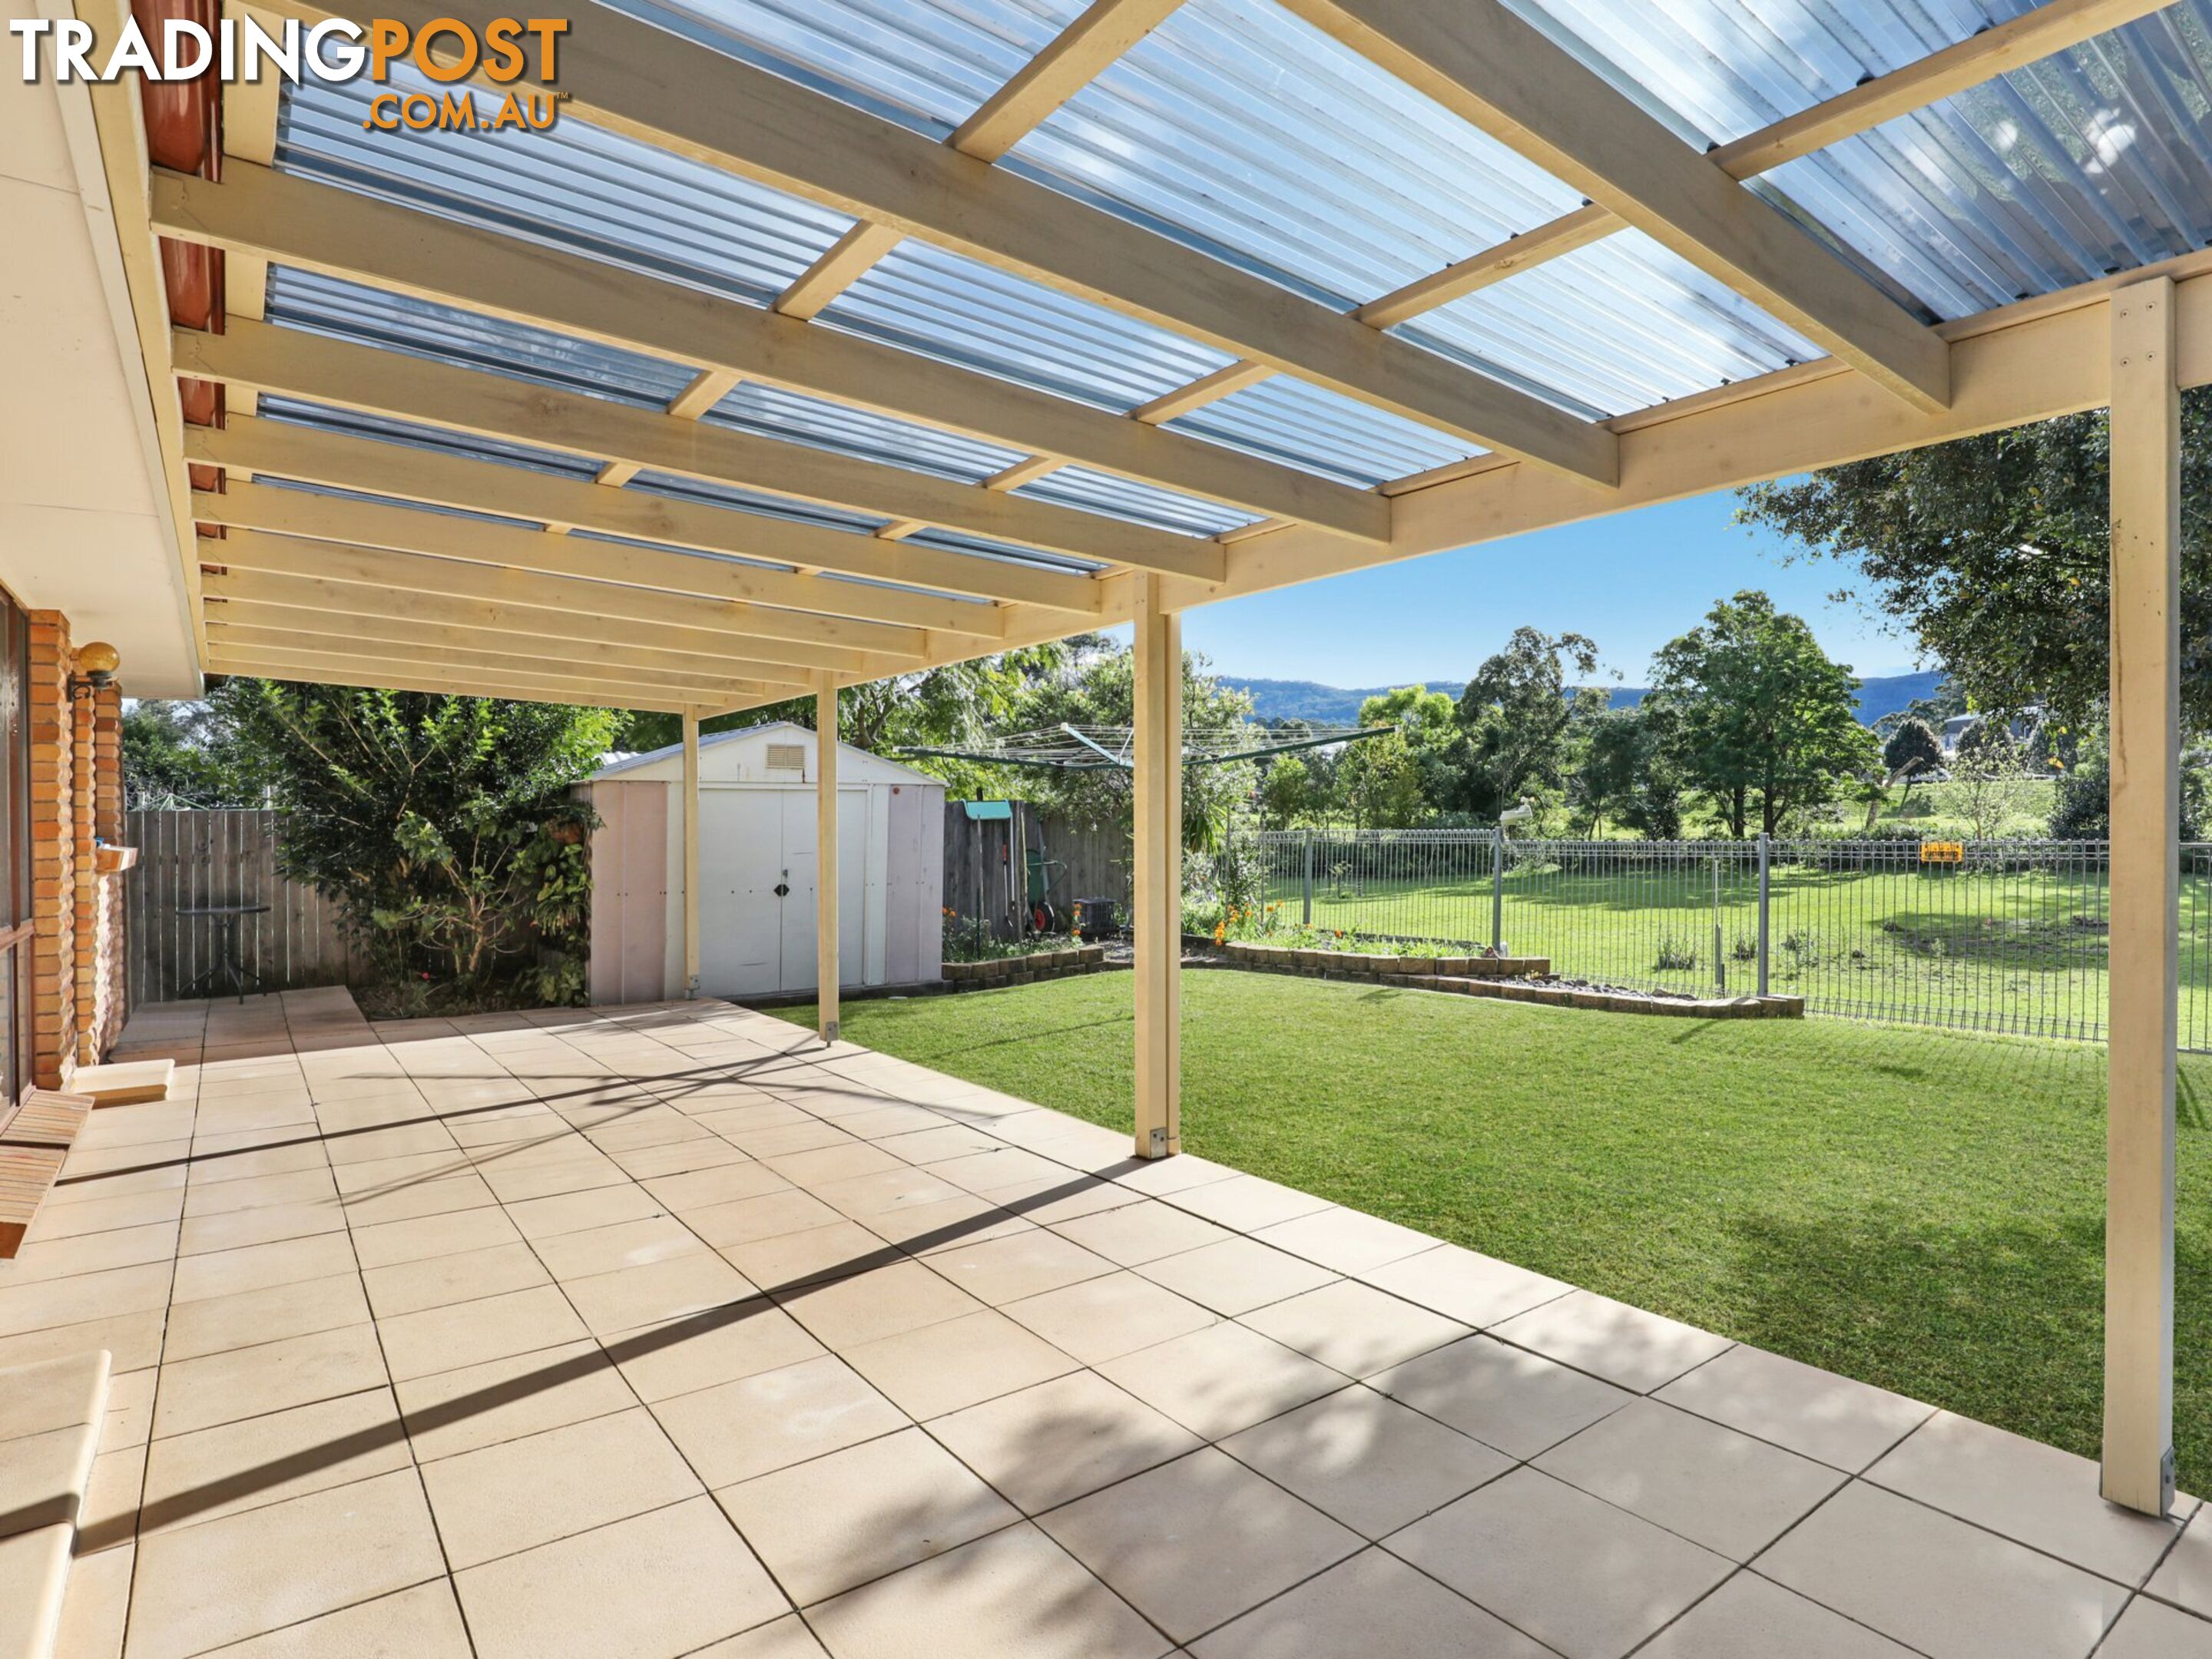 16 Govett Crescent FIGTREE NSW 2525